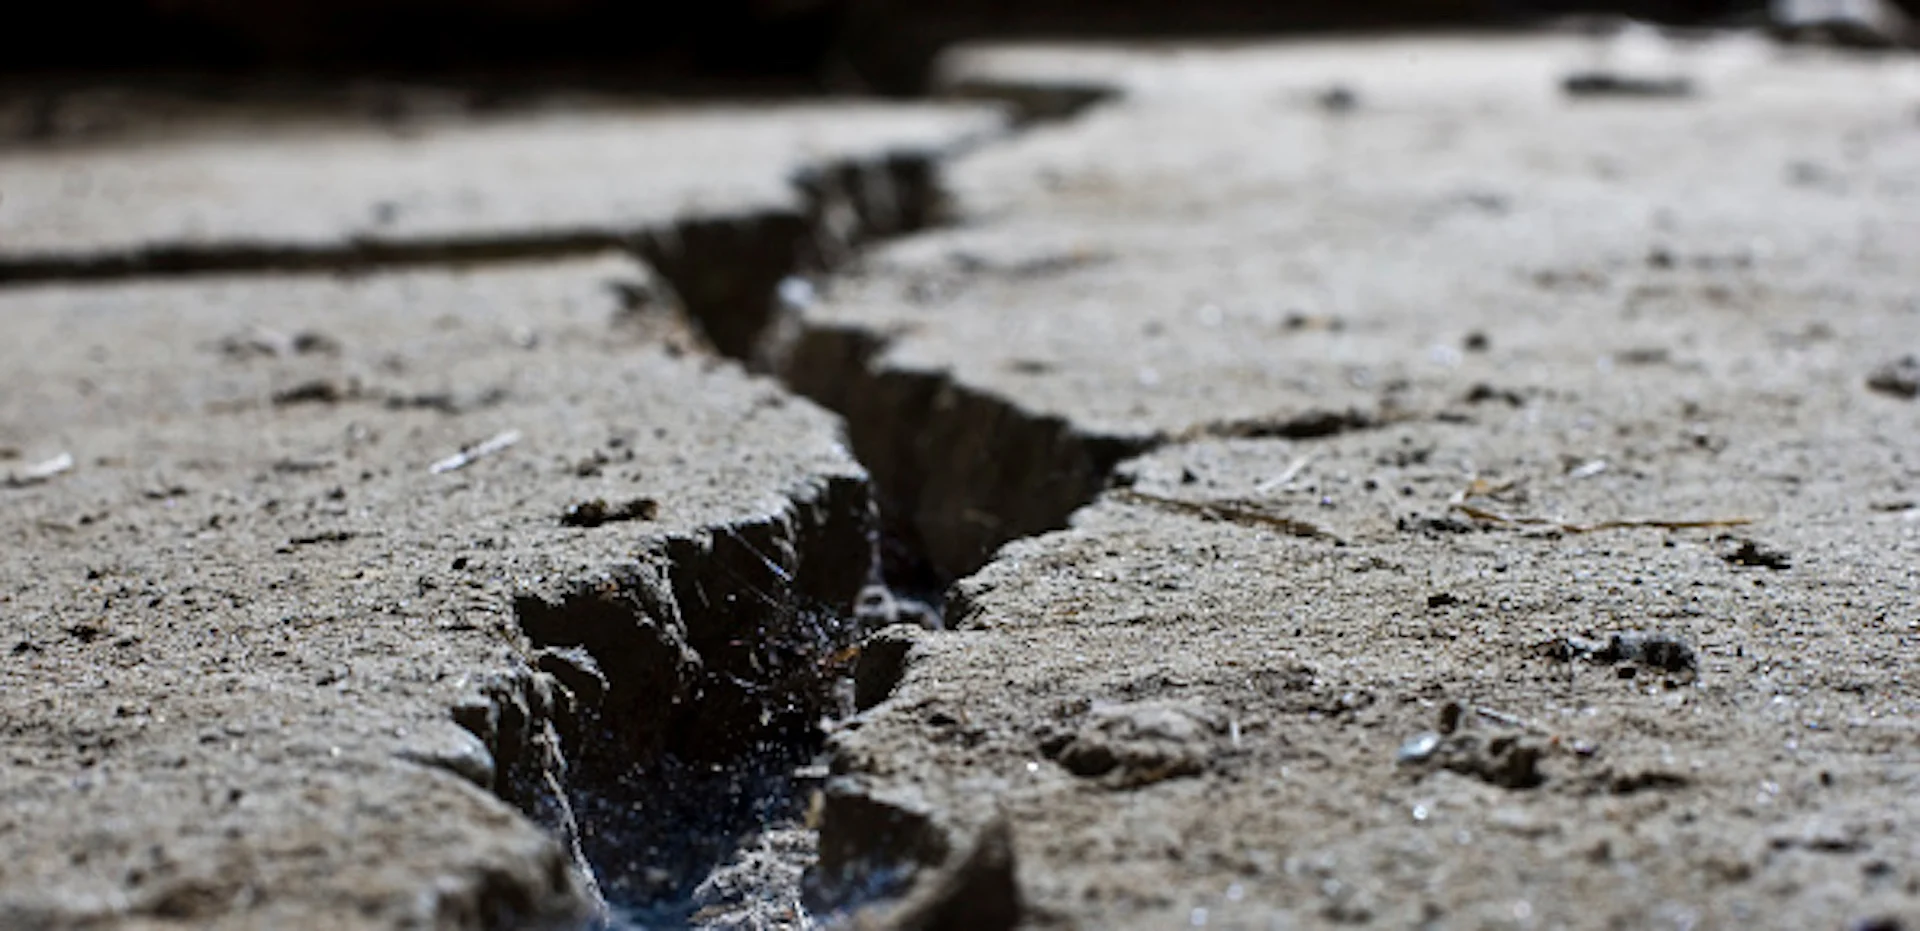 Earthquake study suggests the 'big one' could be much worse than expected